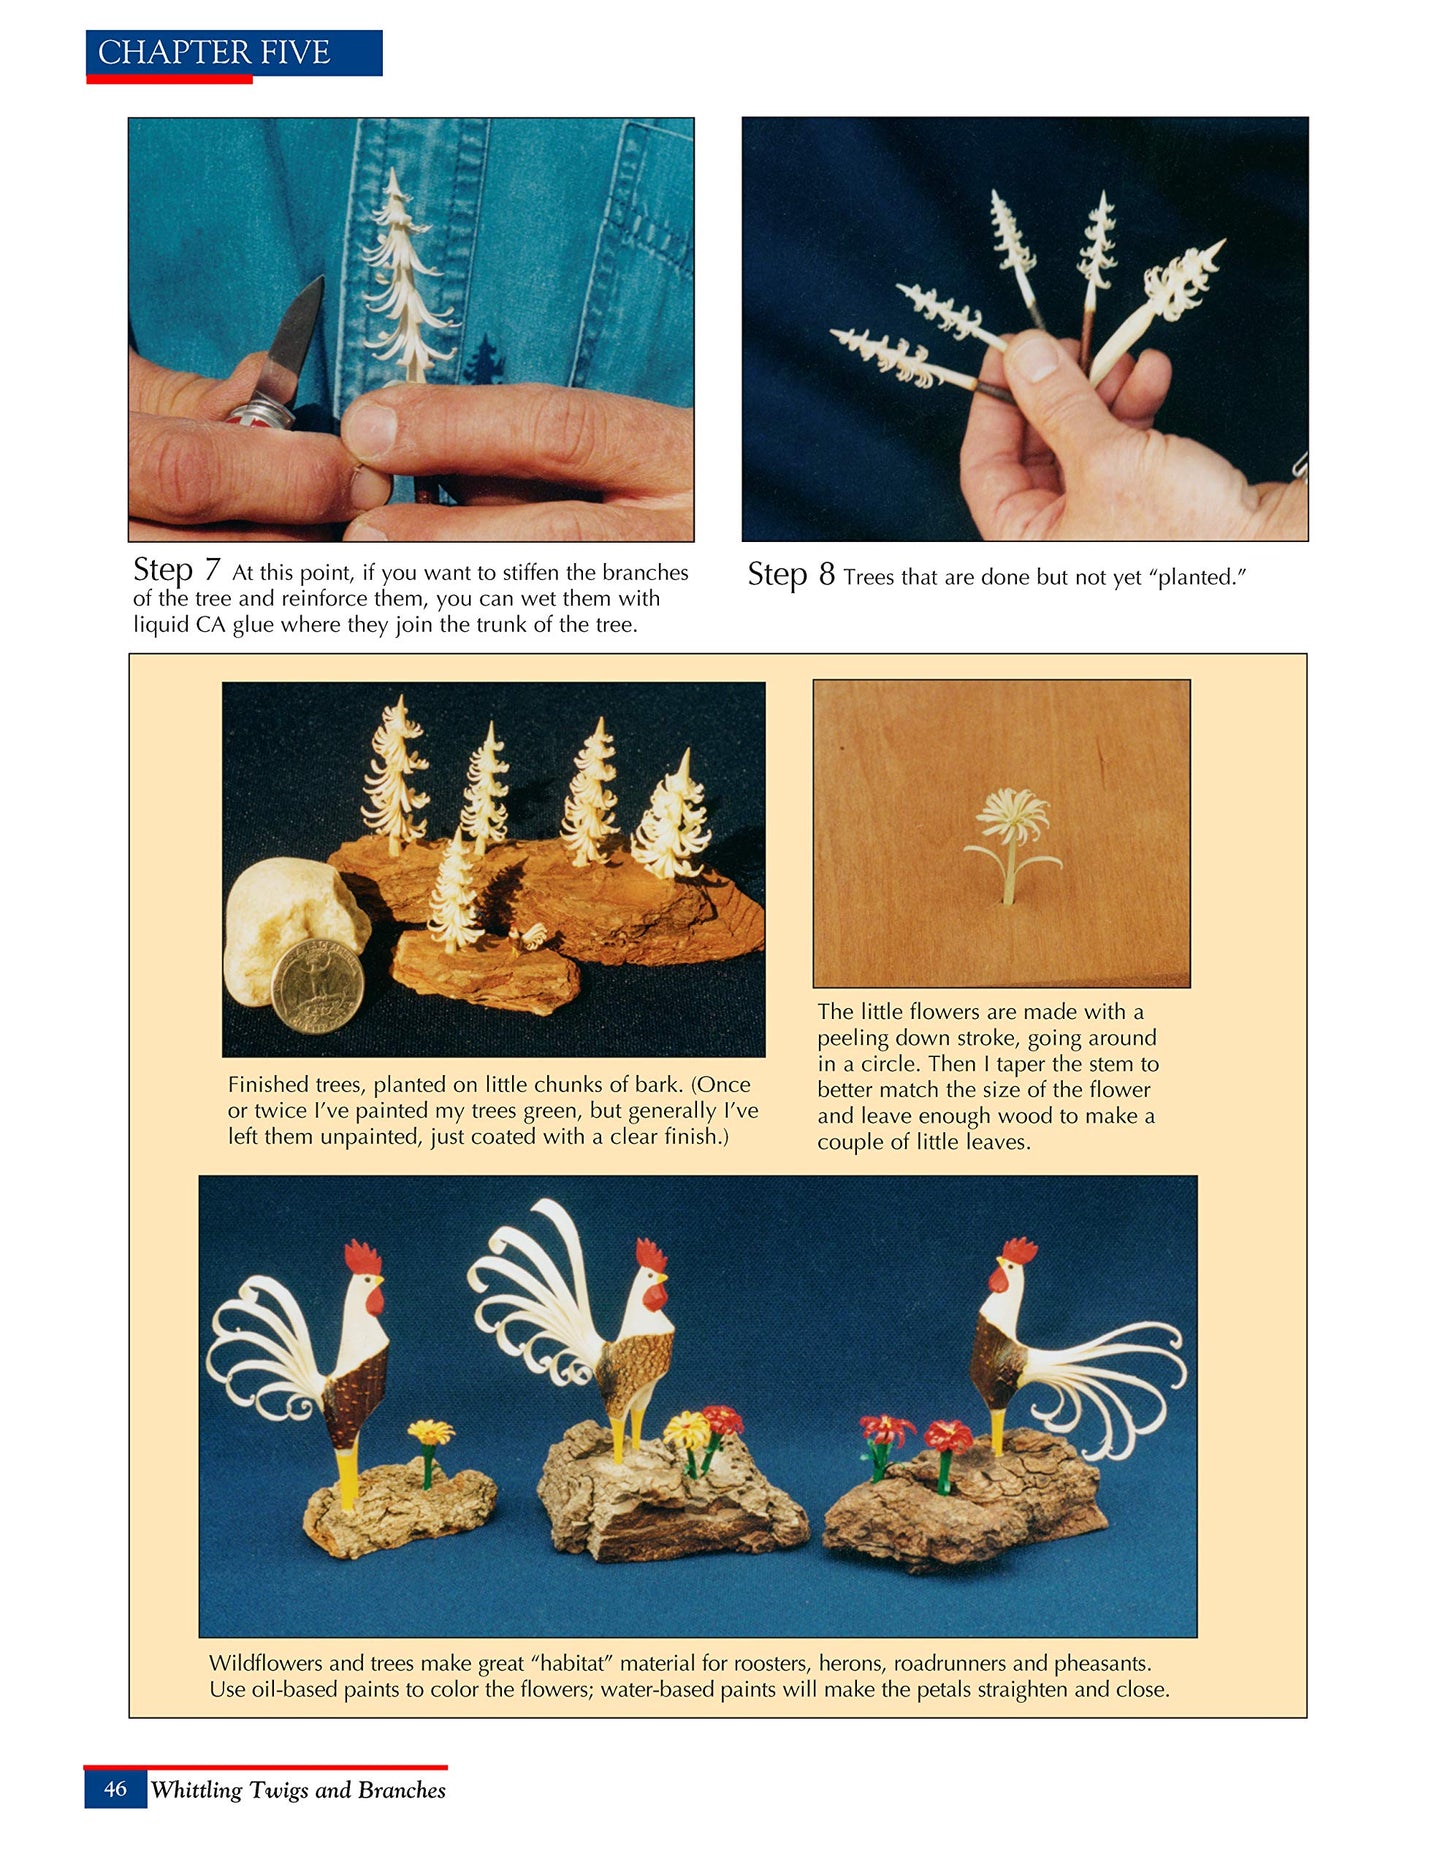 Whittling Twigs & Branches, 2nd Edition: Unique Birds, Flowers, Trees & More from Easy-to-Find Wood (Fox Chapel Publishing) Step-by-Step, Create